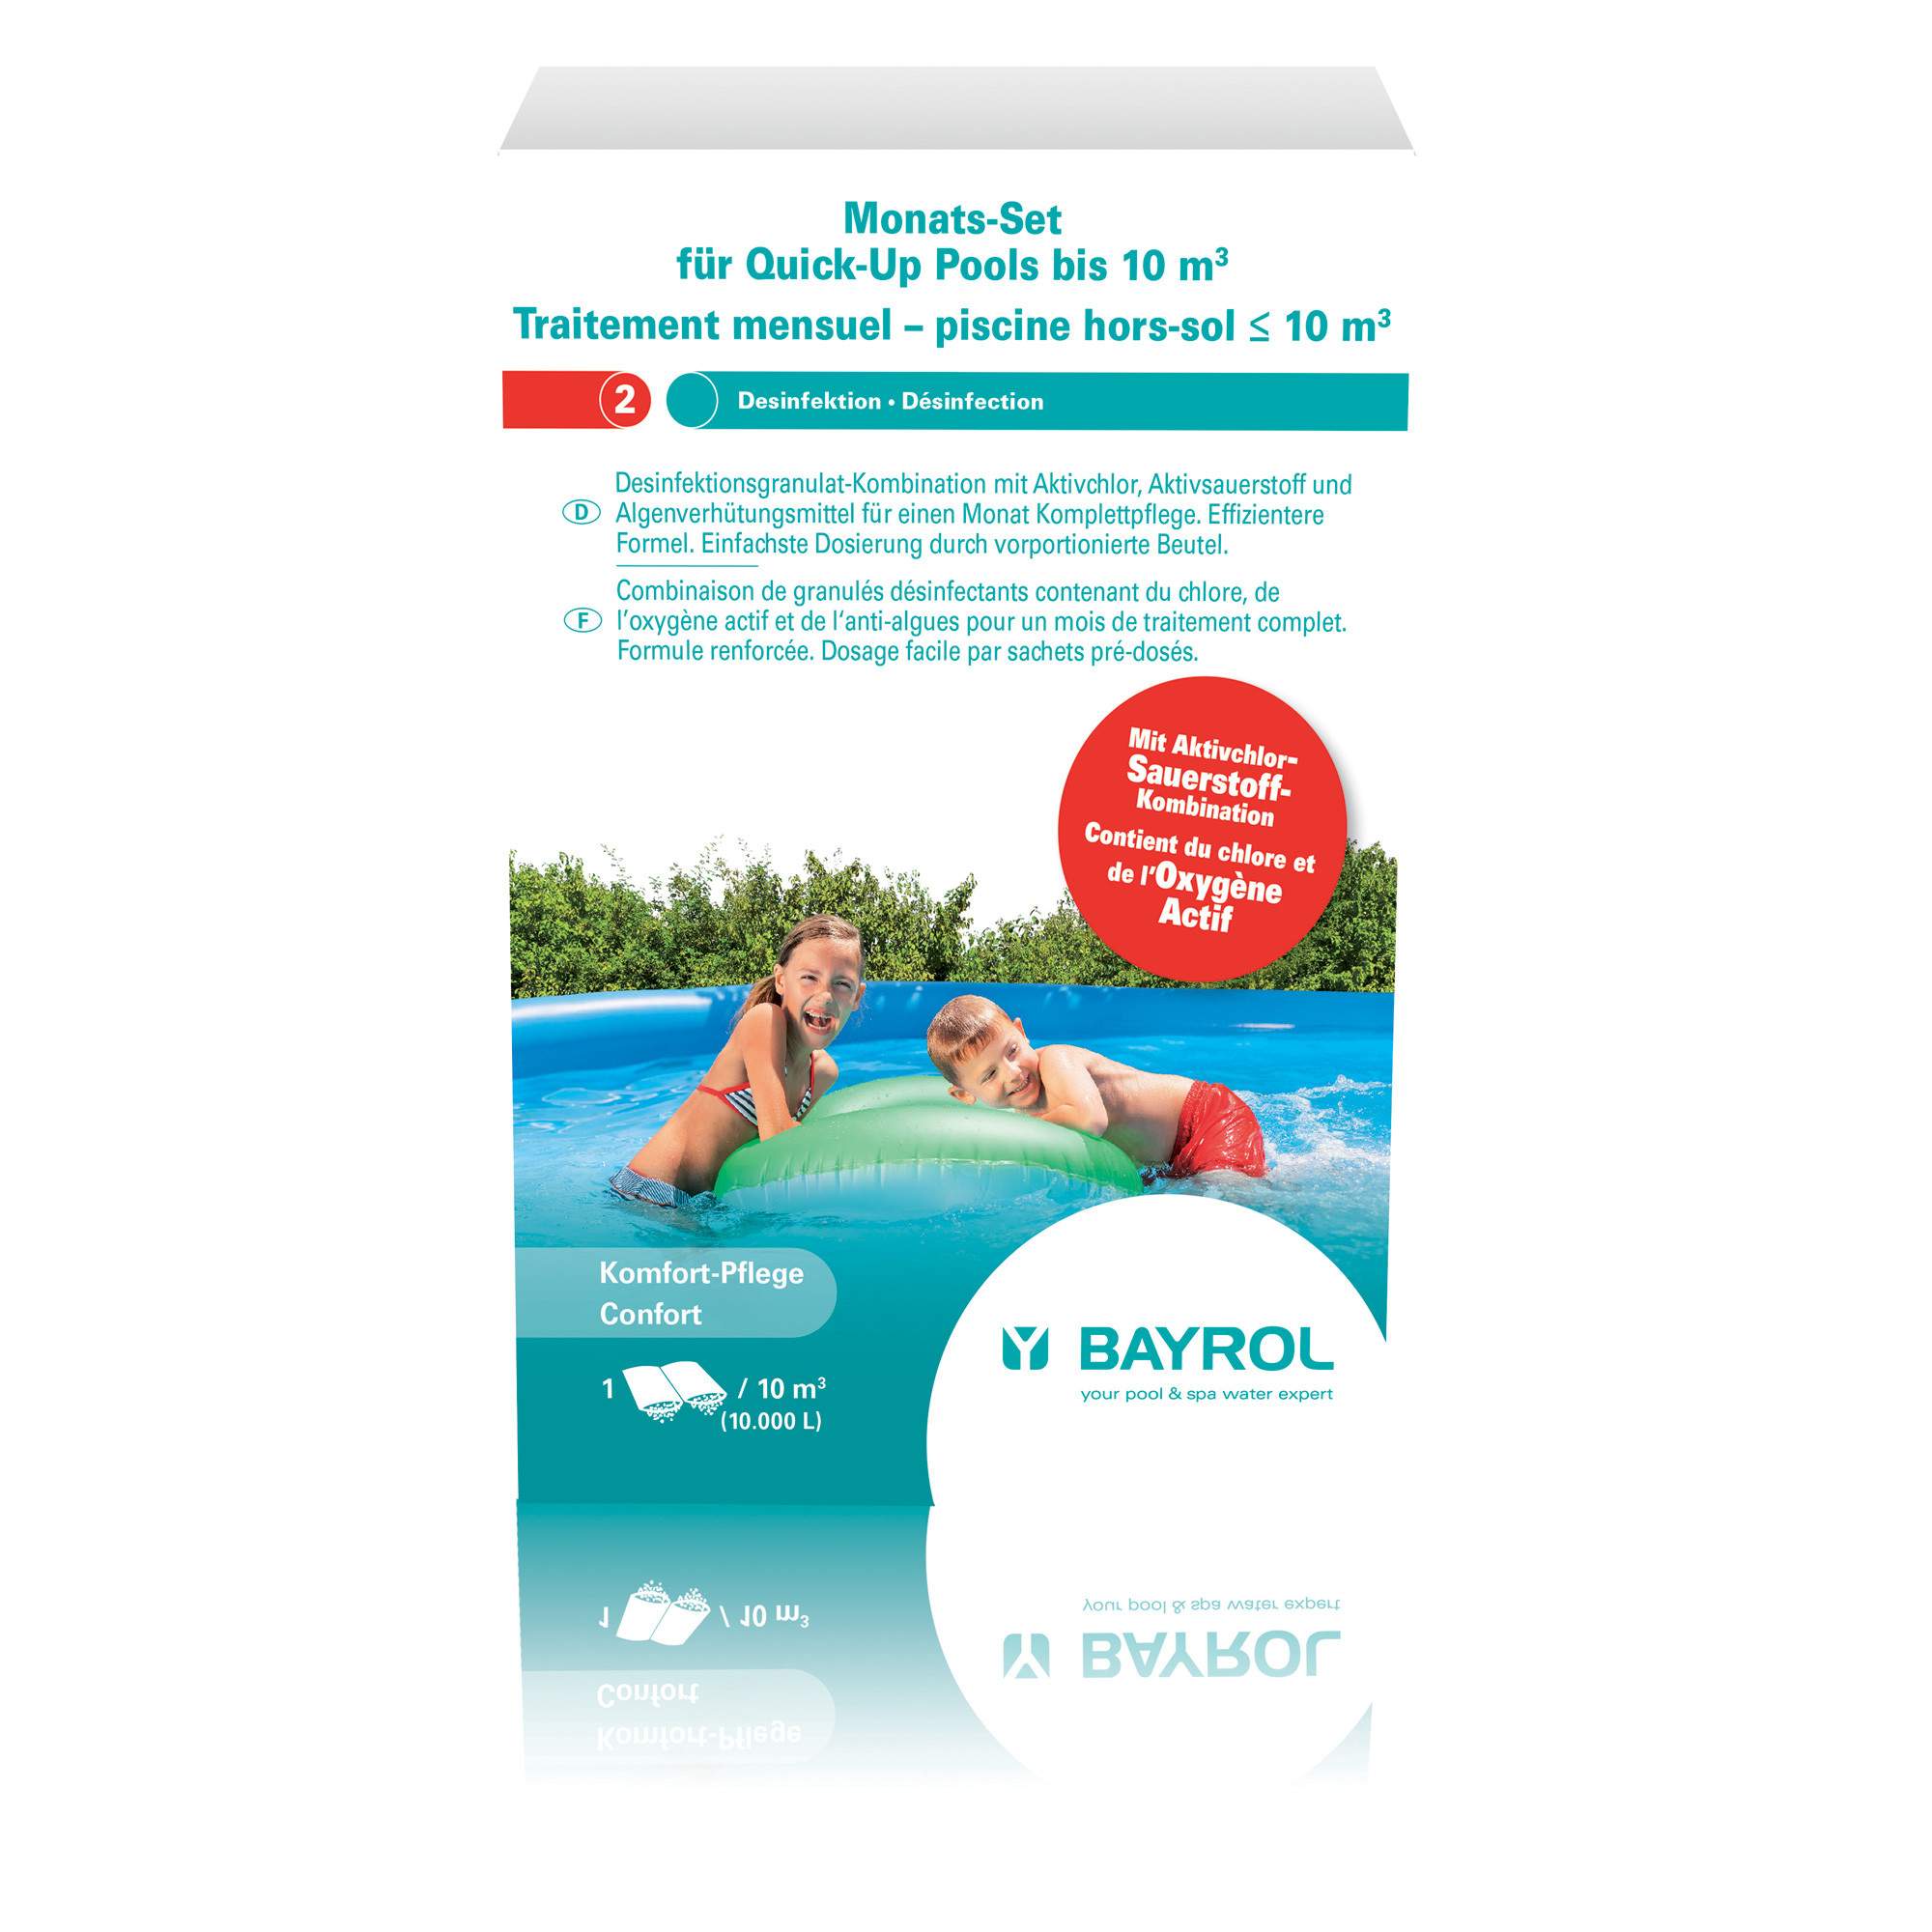 Above ground pool treatment 10m3, 0.6kg.